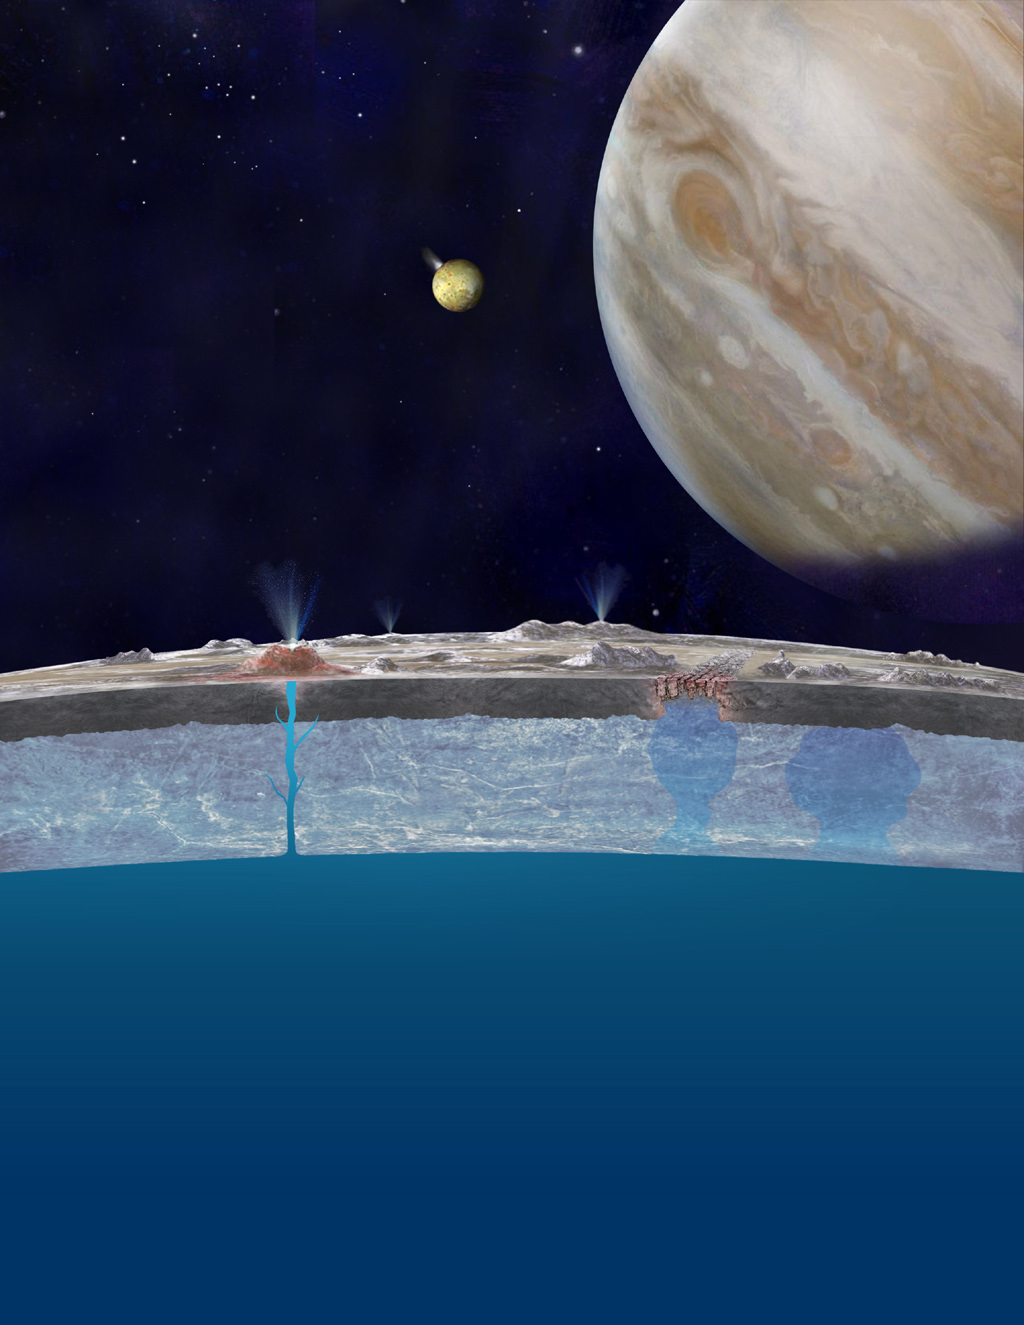 Based on new evidence from Jupiter's moon Europa, astronomers hypothesize that chloride salts bubble up from its global liquid ocean and reach the frozen surface where they are bombarded with sulfur from volcanoes on Jupiter's innermost large moon, Io.